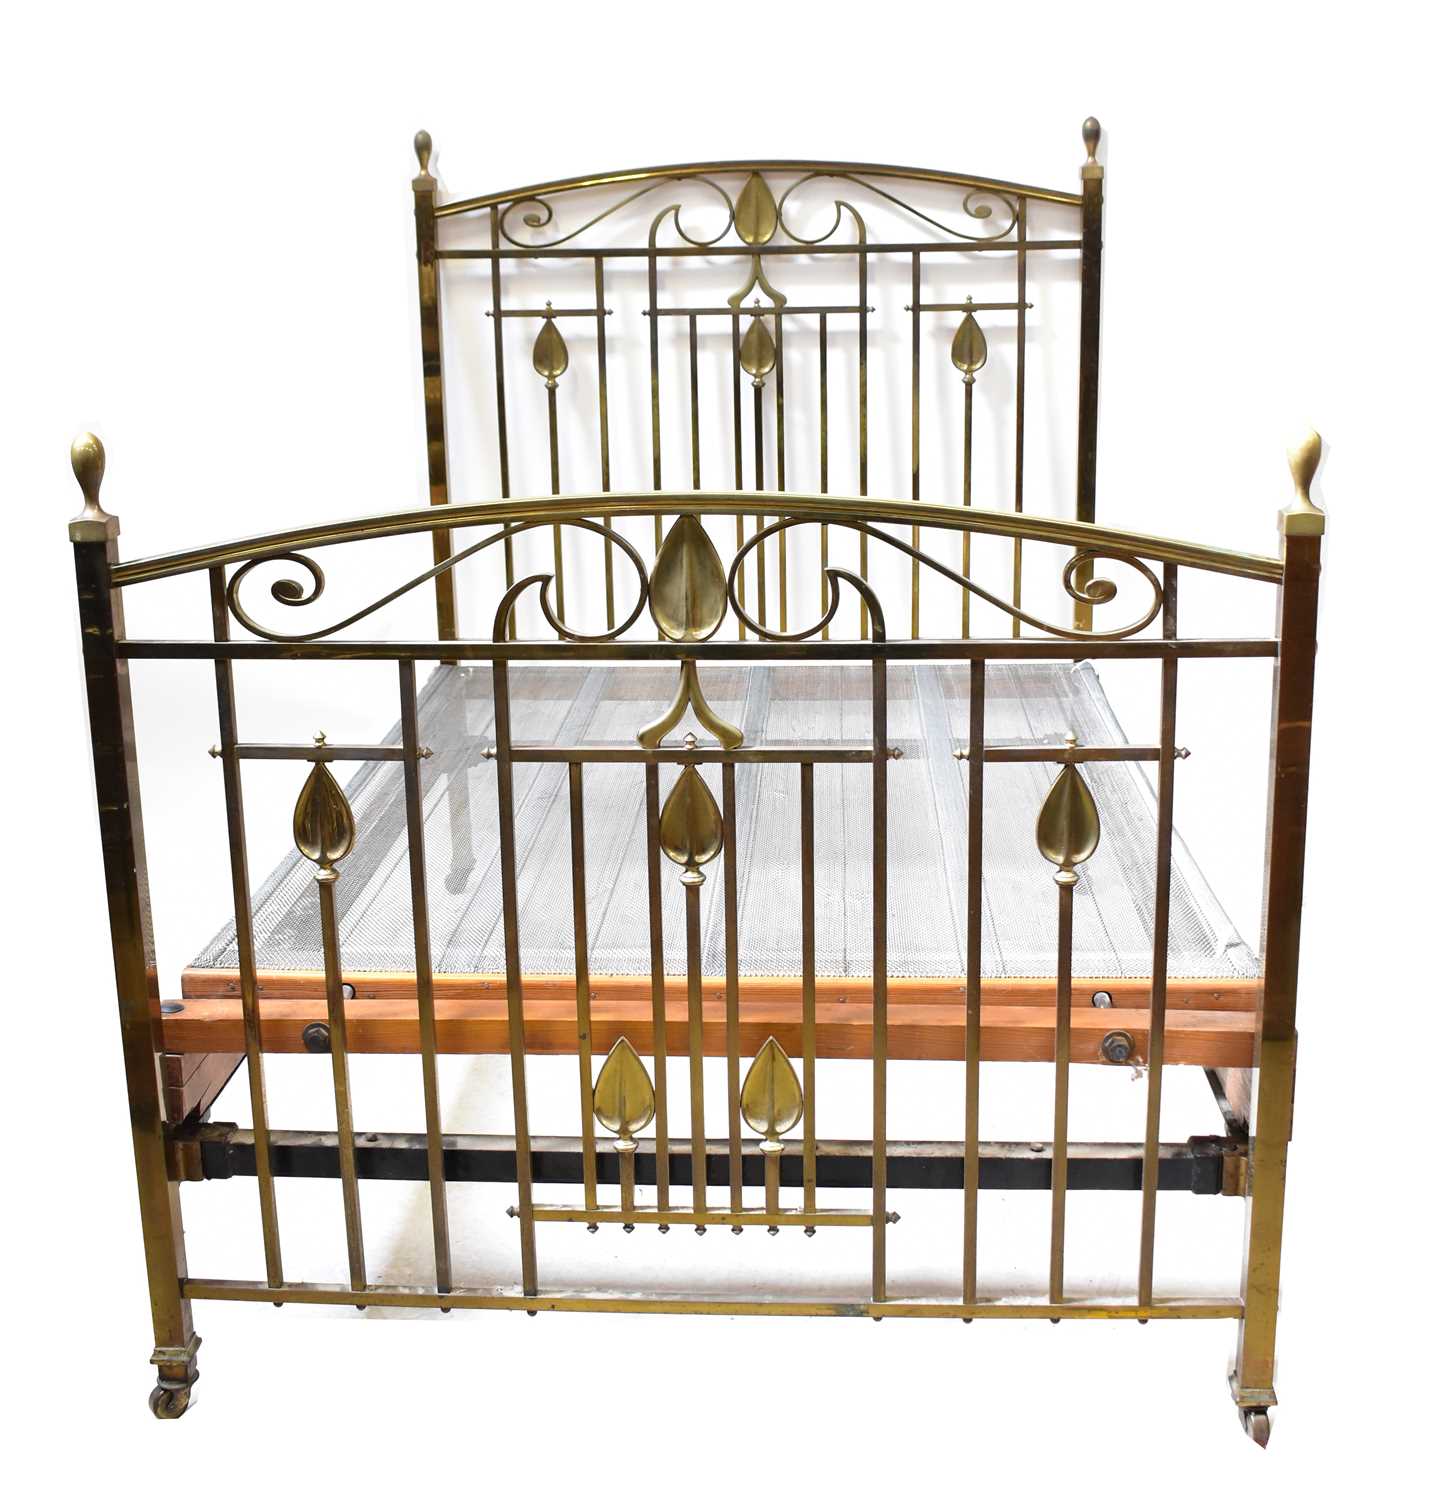 An Art Nouveau brass double bedstead with stylised leaf motifs, arched headboard and foot rail, to